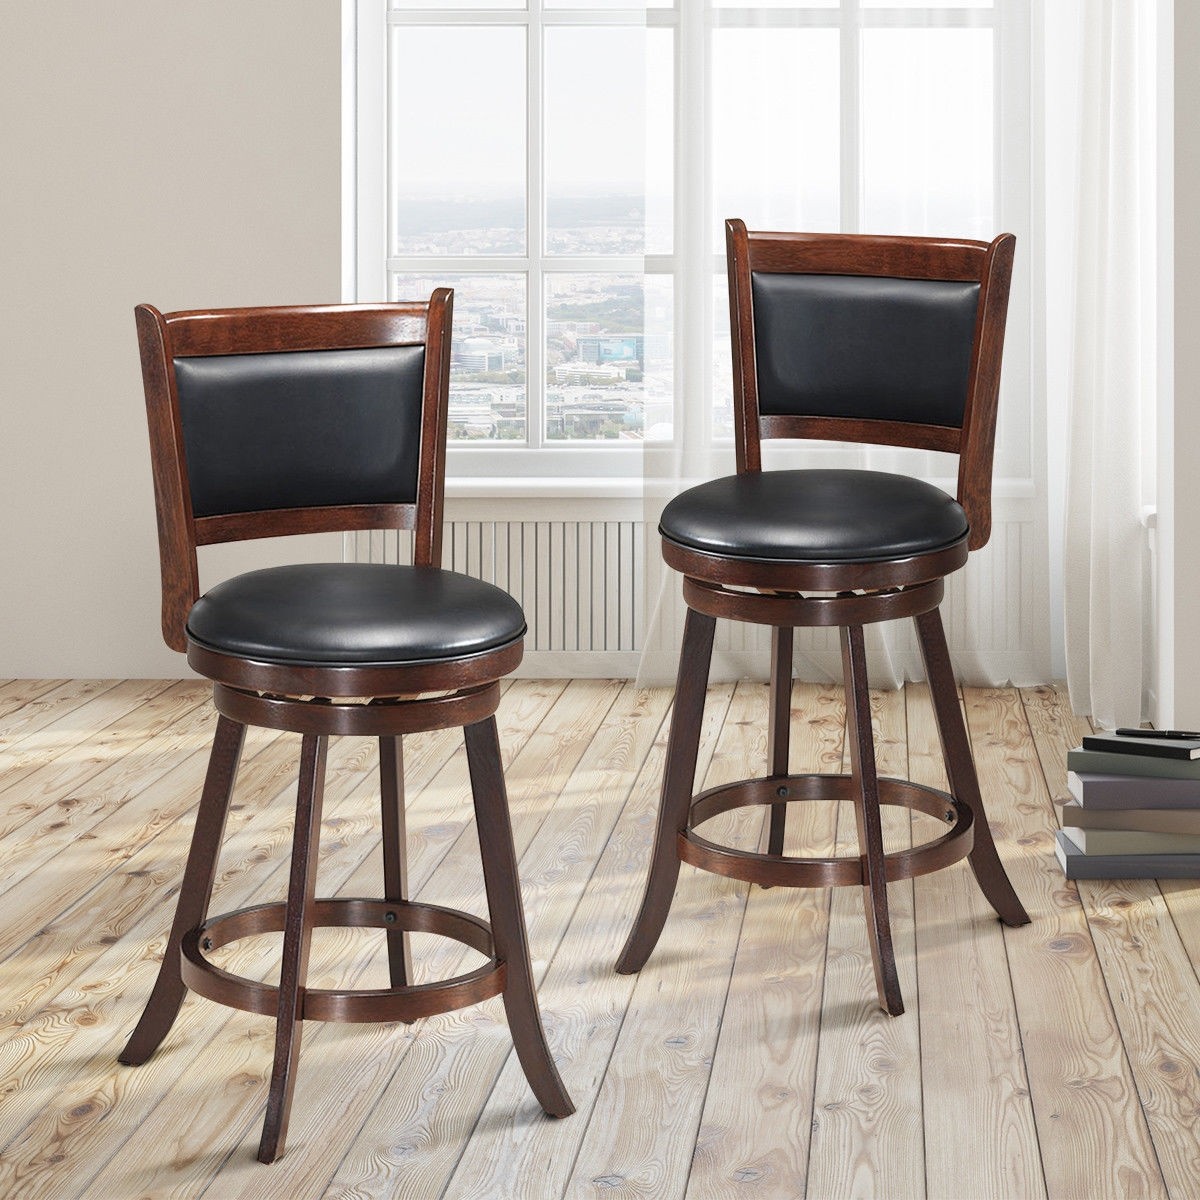 Set Of 2 Swivel Counter Upholstered Seat Wooden Dining Chairs